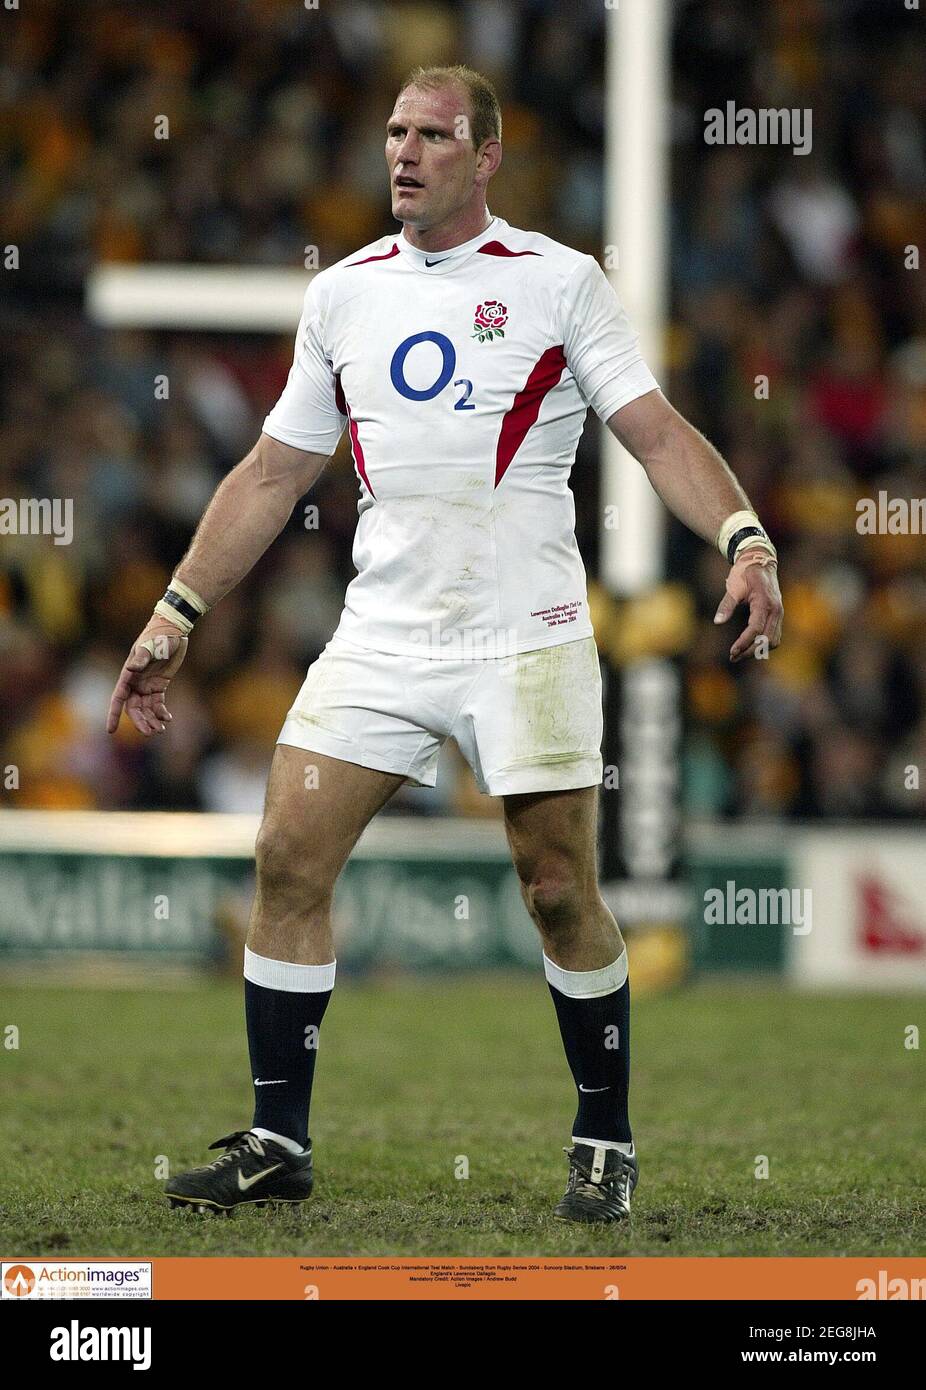 Rugby Union - Australia v England Cook Cup International Test Match - Bundaberg Rum Rugby Series 2004 - Suncorp Stadium, Brisbane - 26/6/04  England's Lawrence Dallaglio  Mandatory Credit: Action Images / Andrew Budd  Livepic Stock Photo